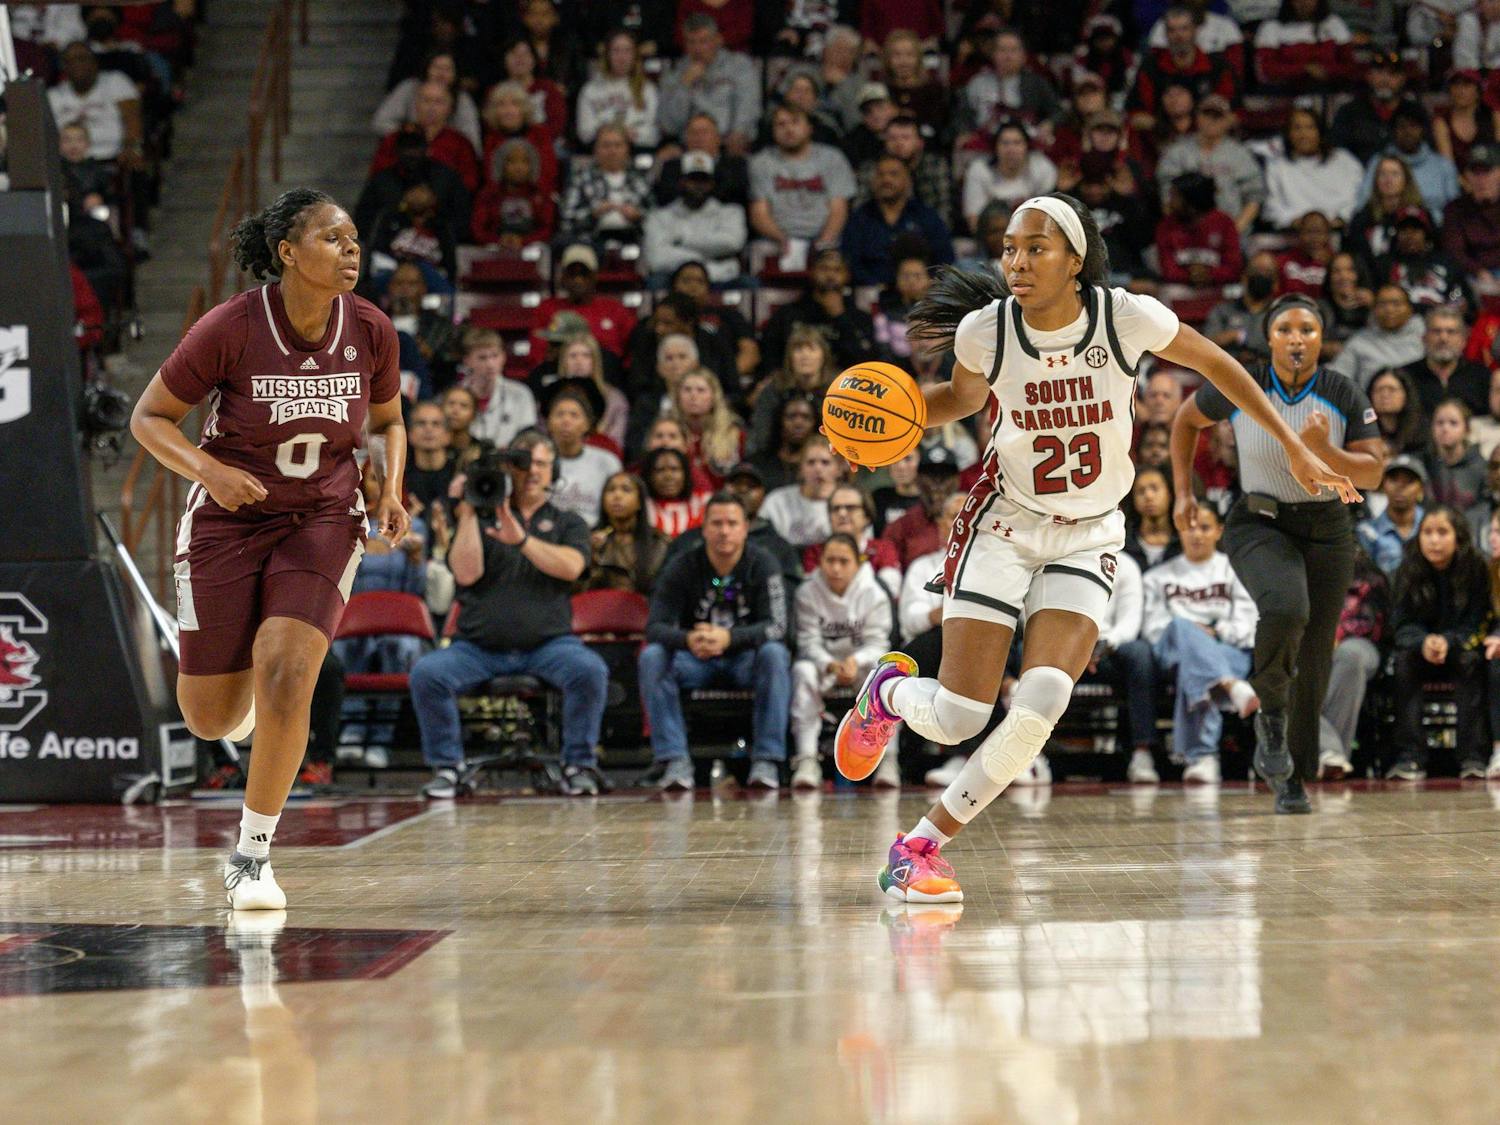 Junior guard Bree Hall drives the ball through the court against Mississippi State's defense. The Gamecocks won 85-66 against the Bulldogs.